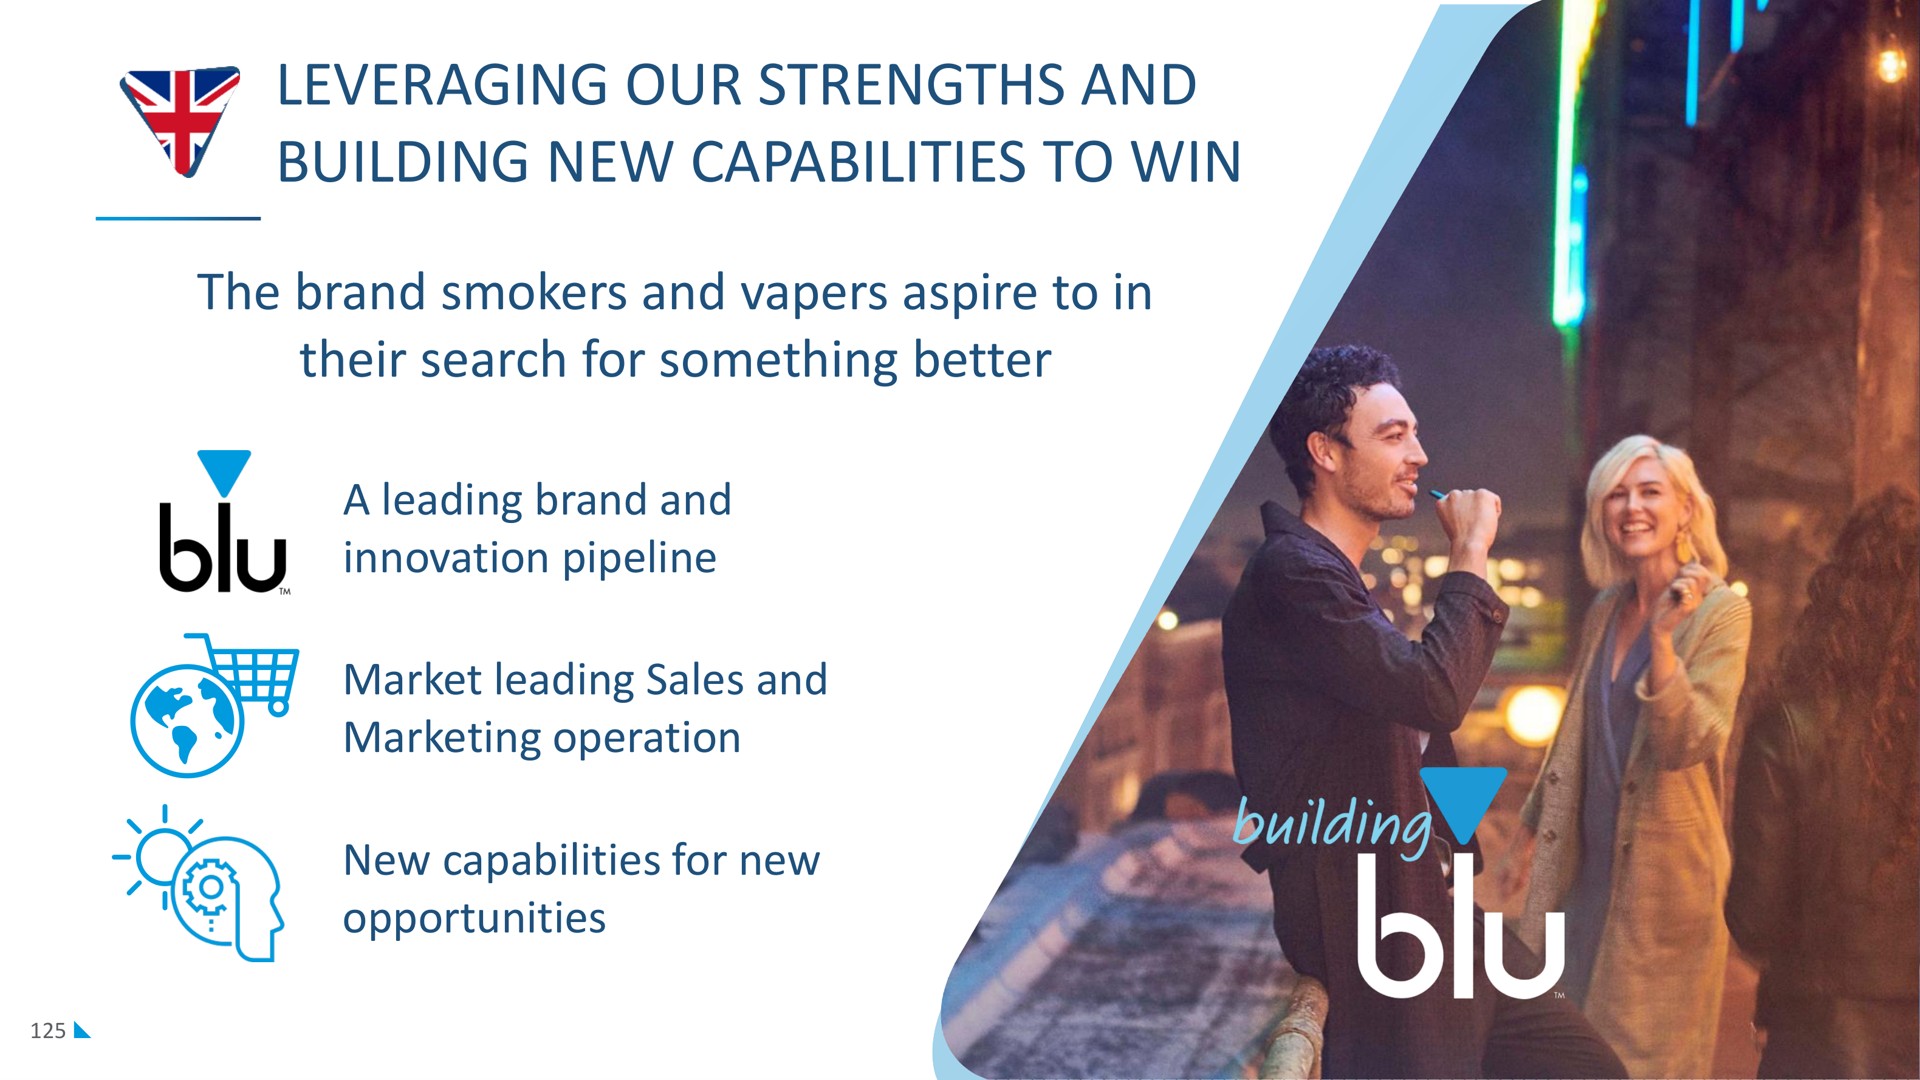 leveraging our strengths and building new capabilities to win | Imperial Brands